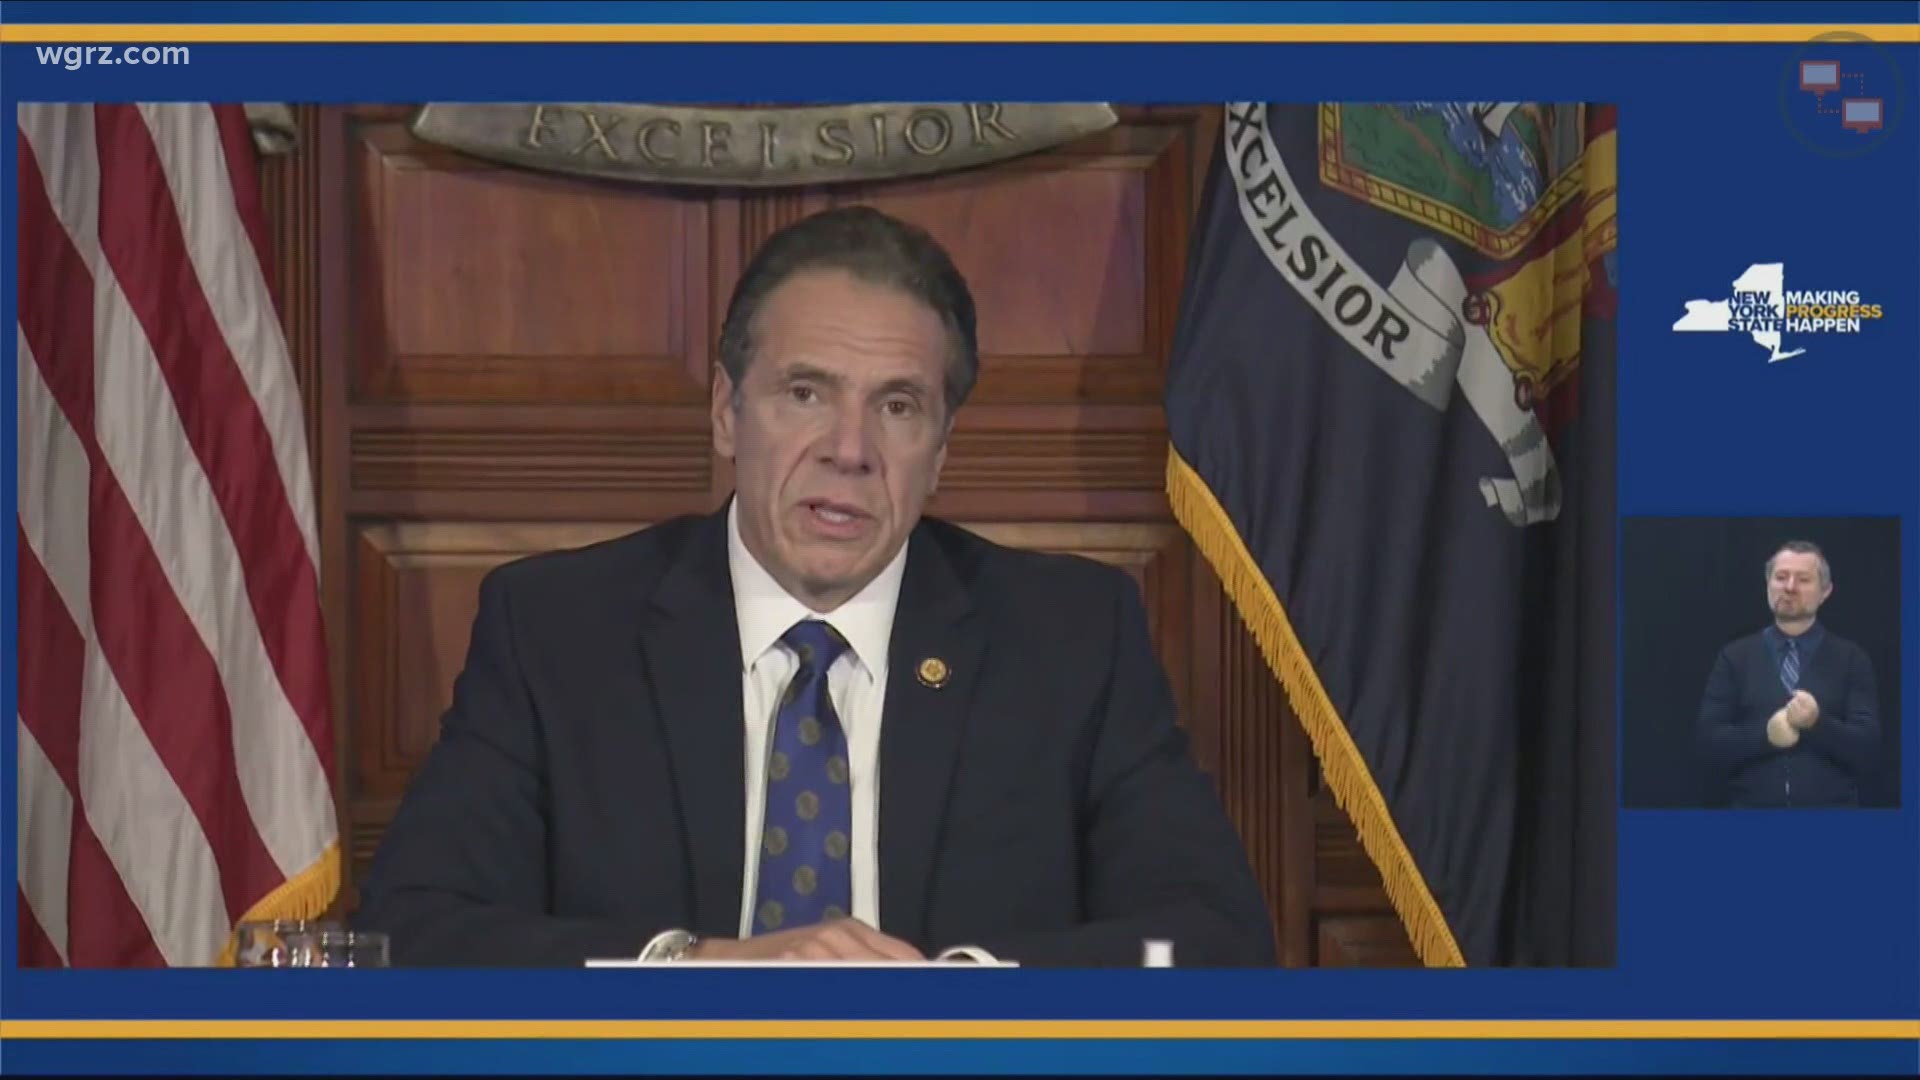 Challenge to Governor Cuomo's executive orders